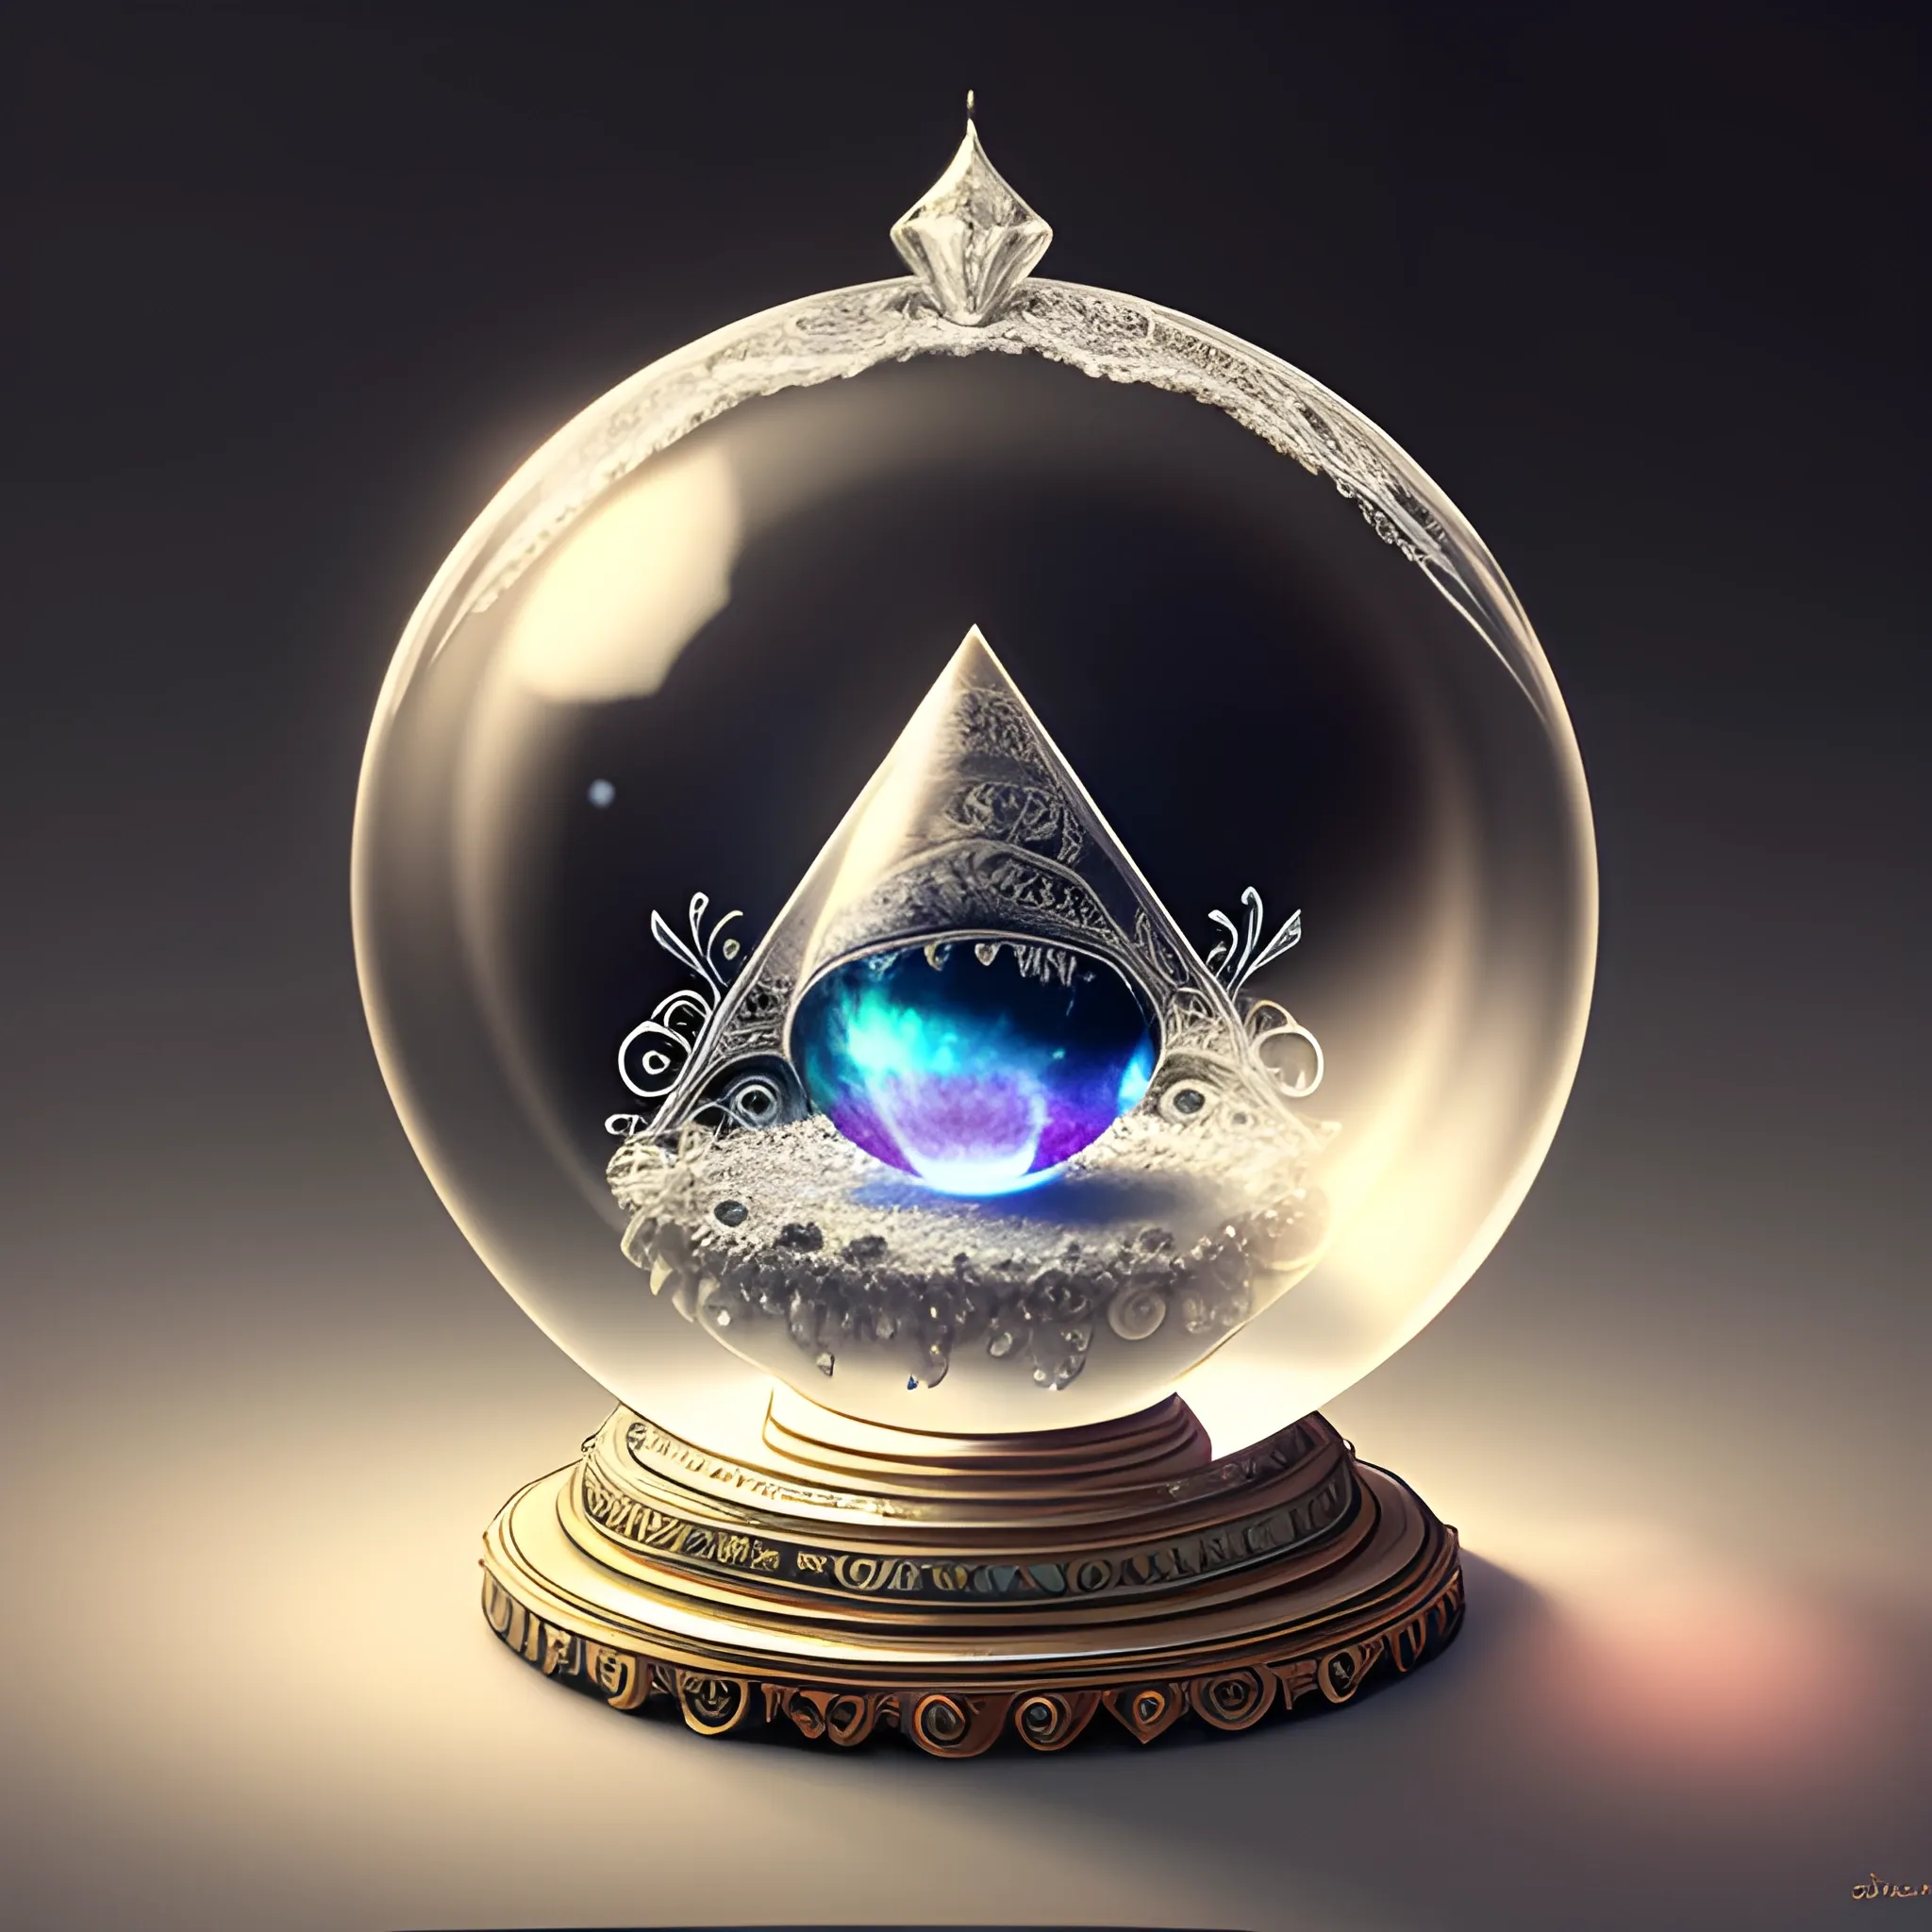 A magic crystal ball, concept art, 1080p intricate details, fairytale style,